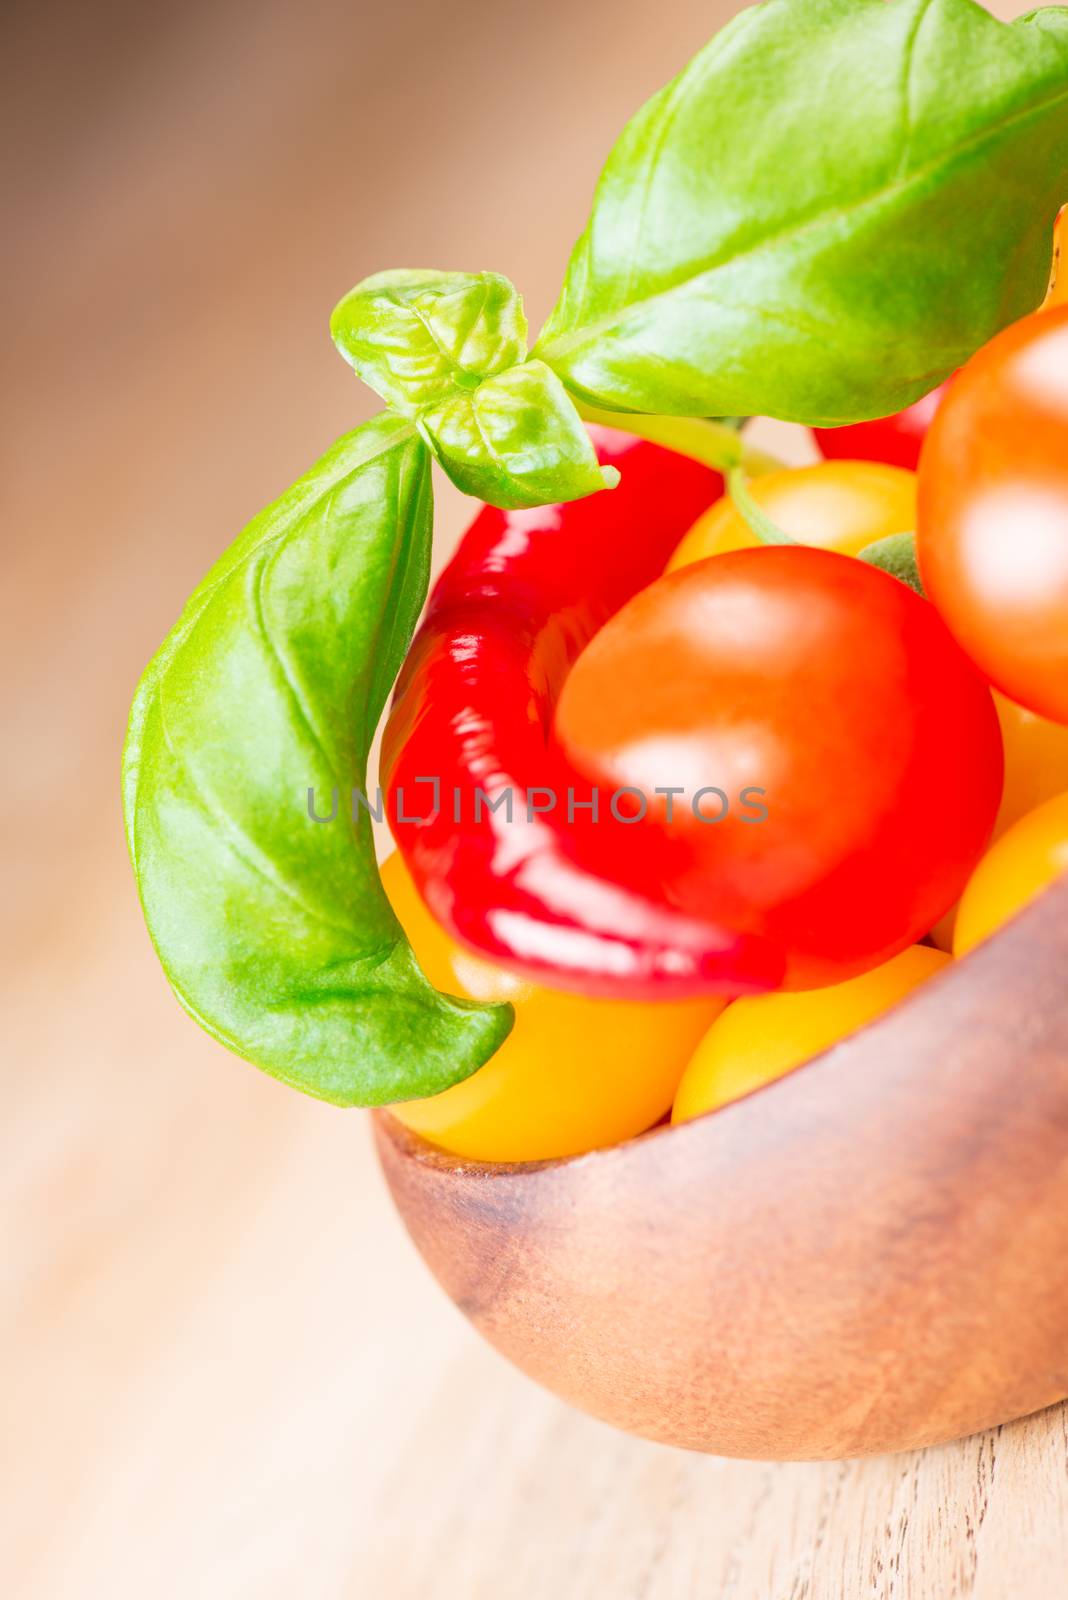 basil leafs with cherry tomatoes and chili pepper in wooden bowl